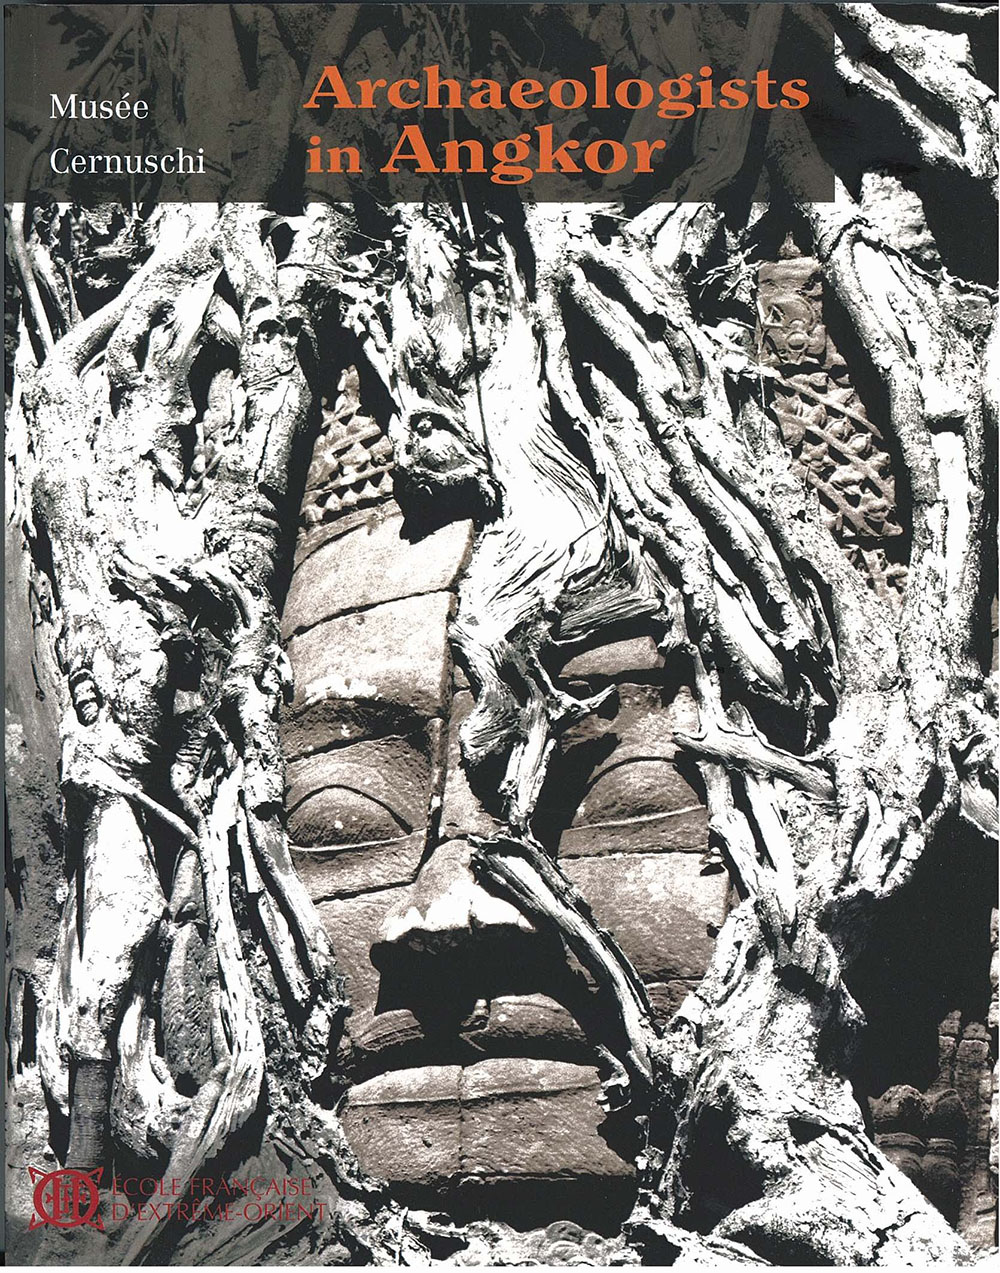 Archaeologists in Angkor